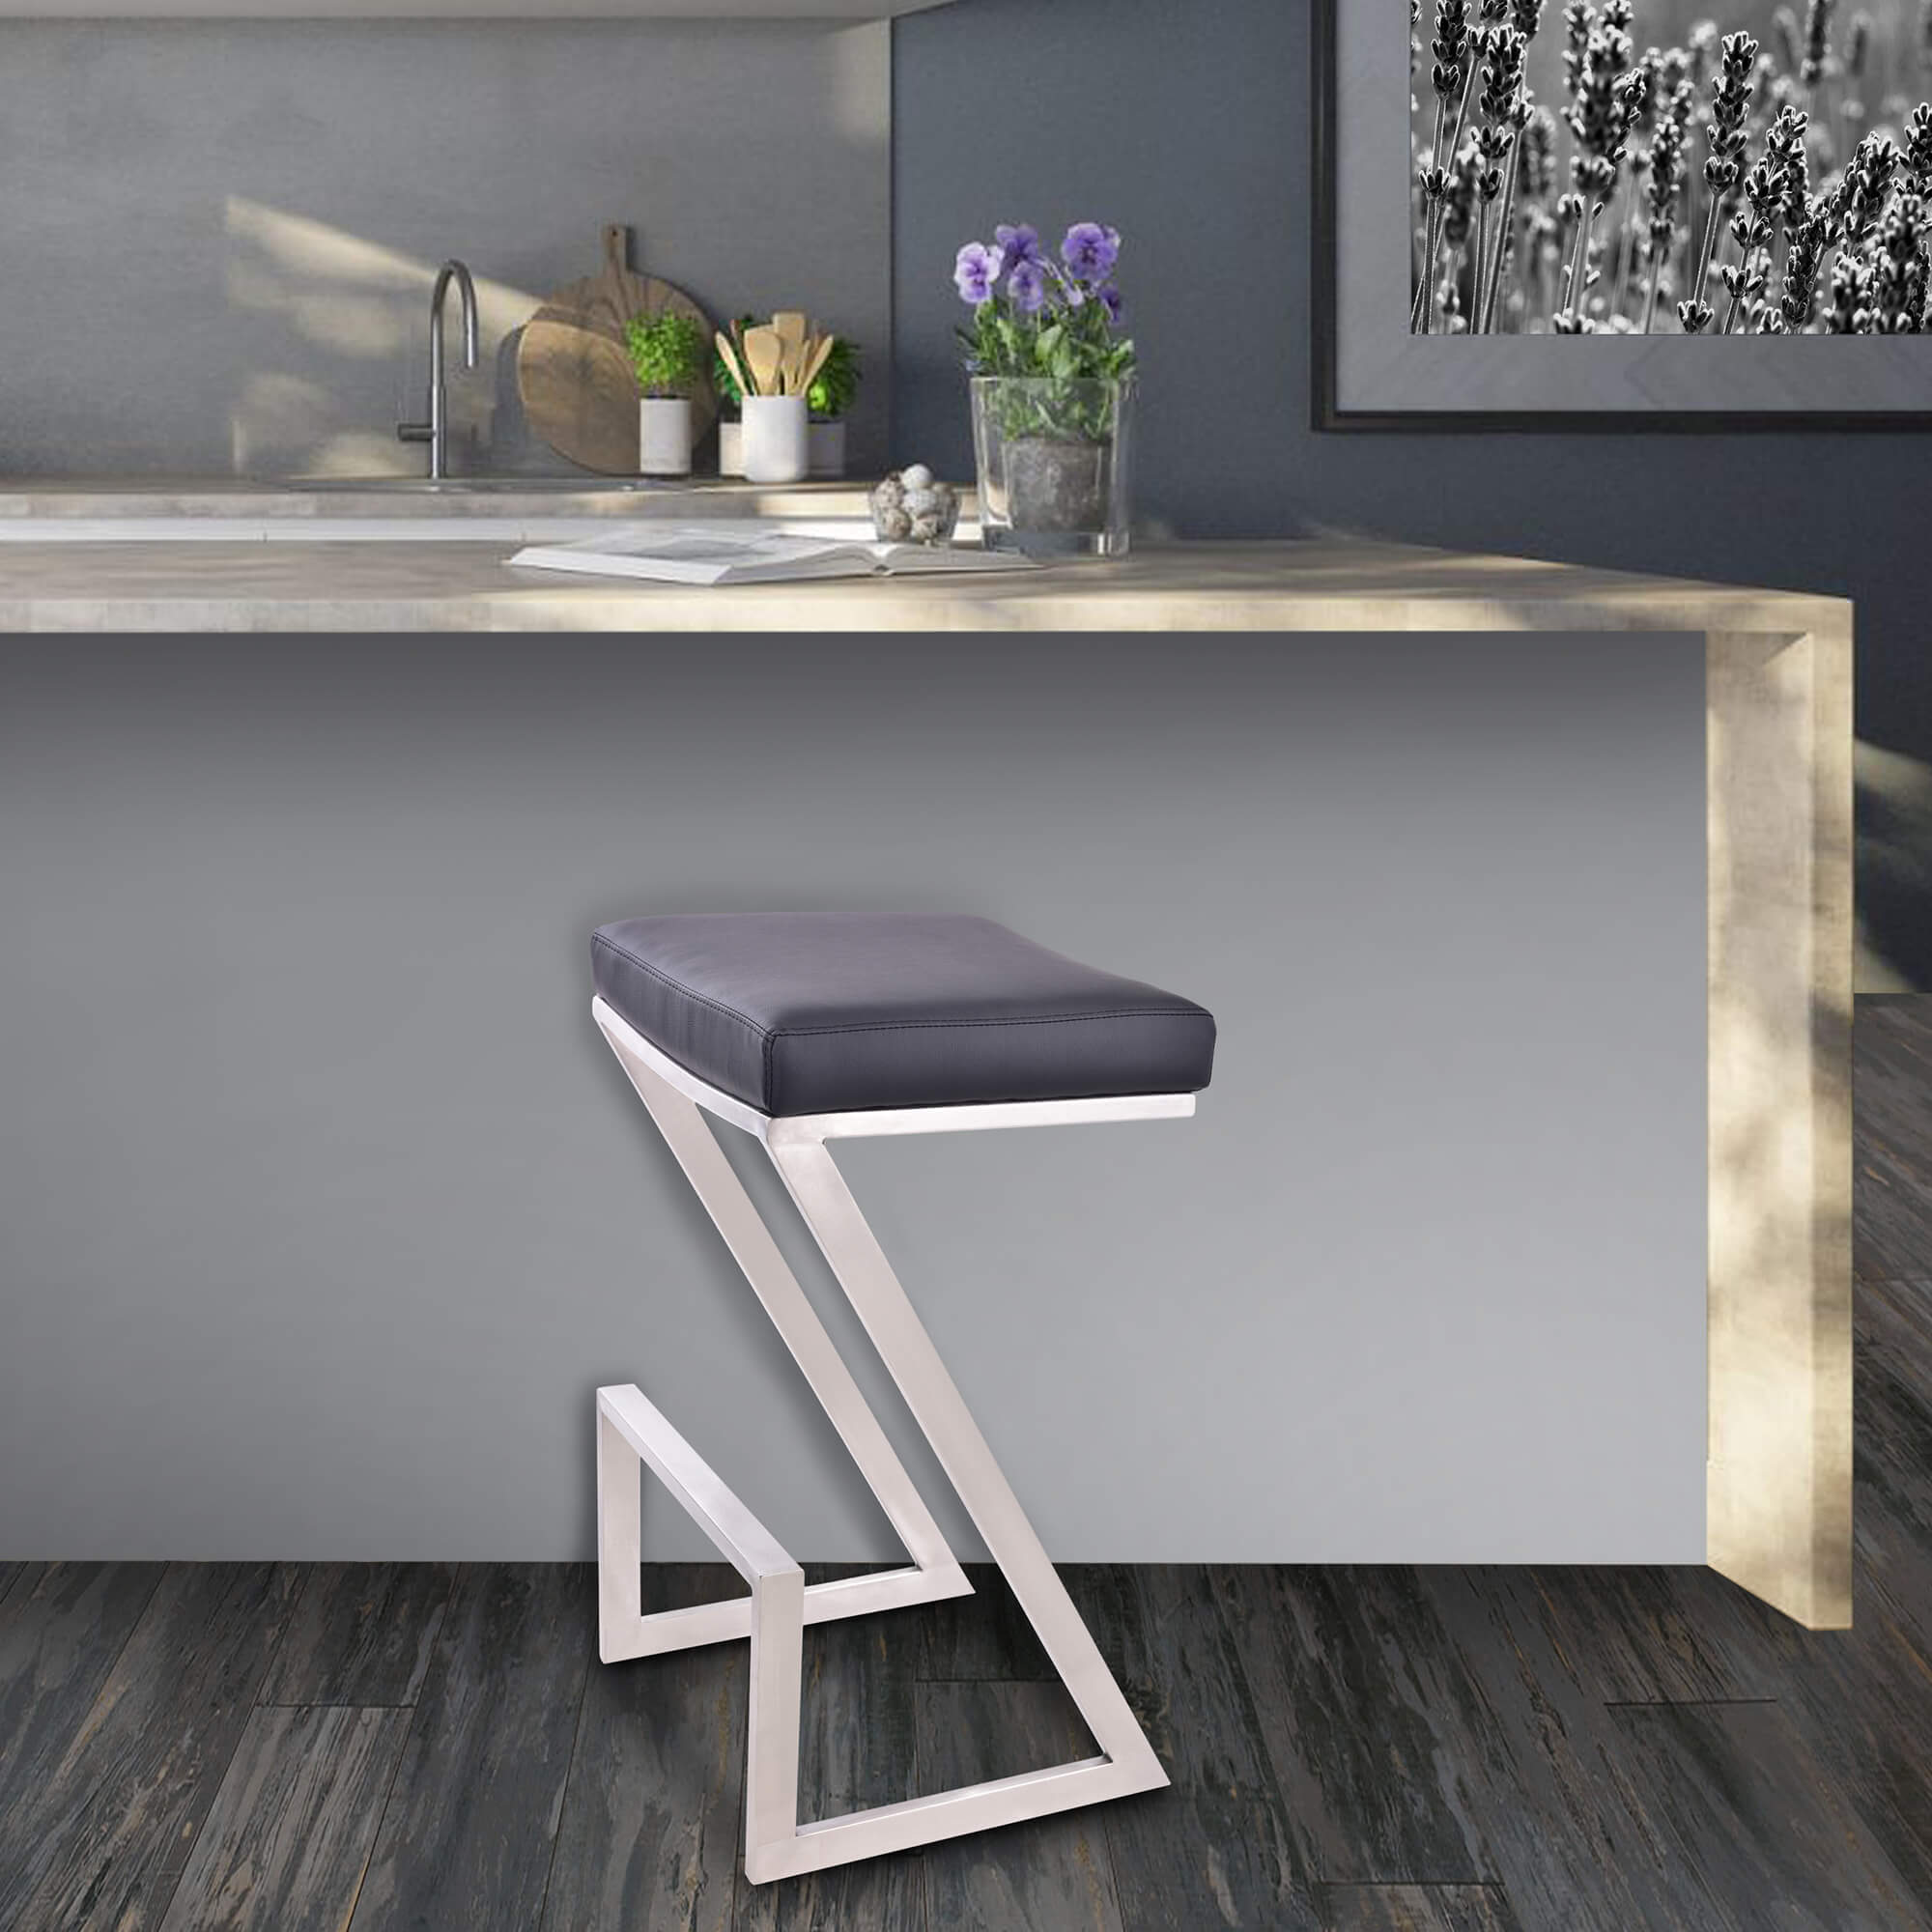 Atlantis 26" Counter Height Backless Barstool in Brushed Stainless Steel finish with Gray Faux Leather